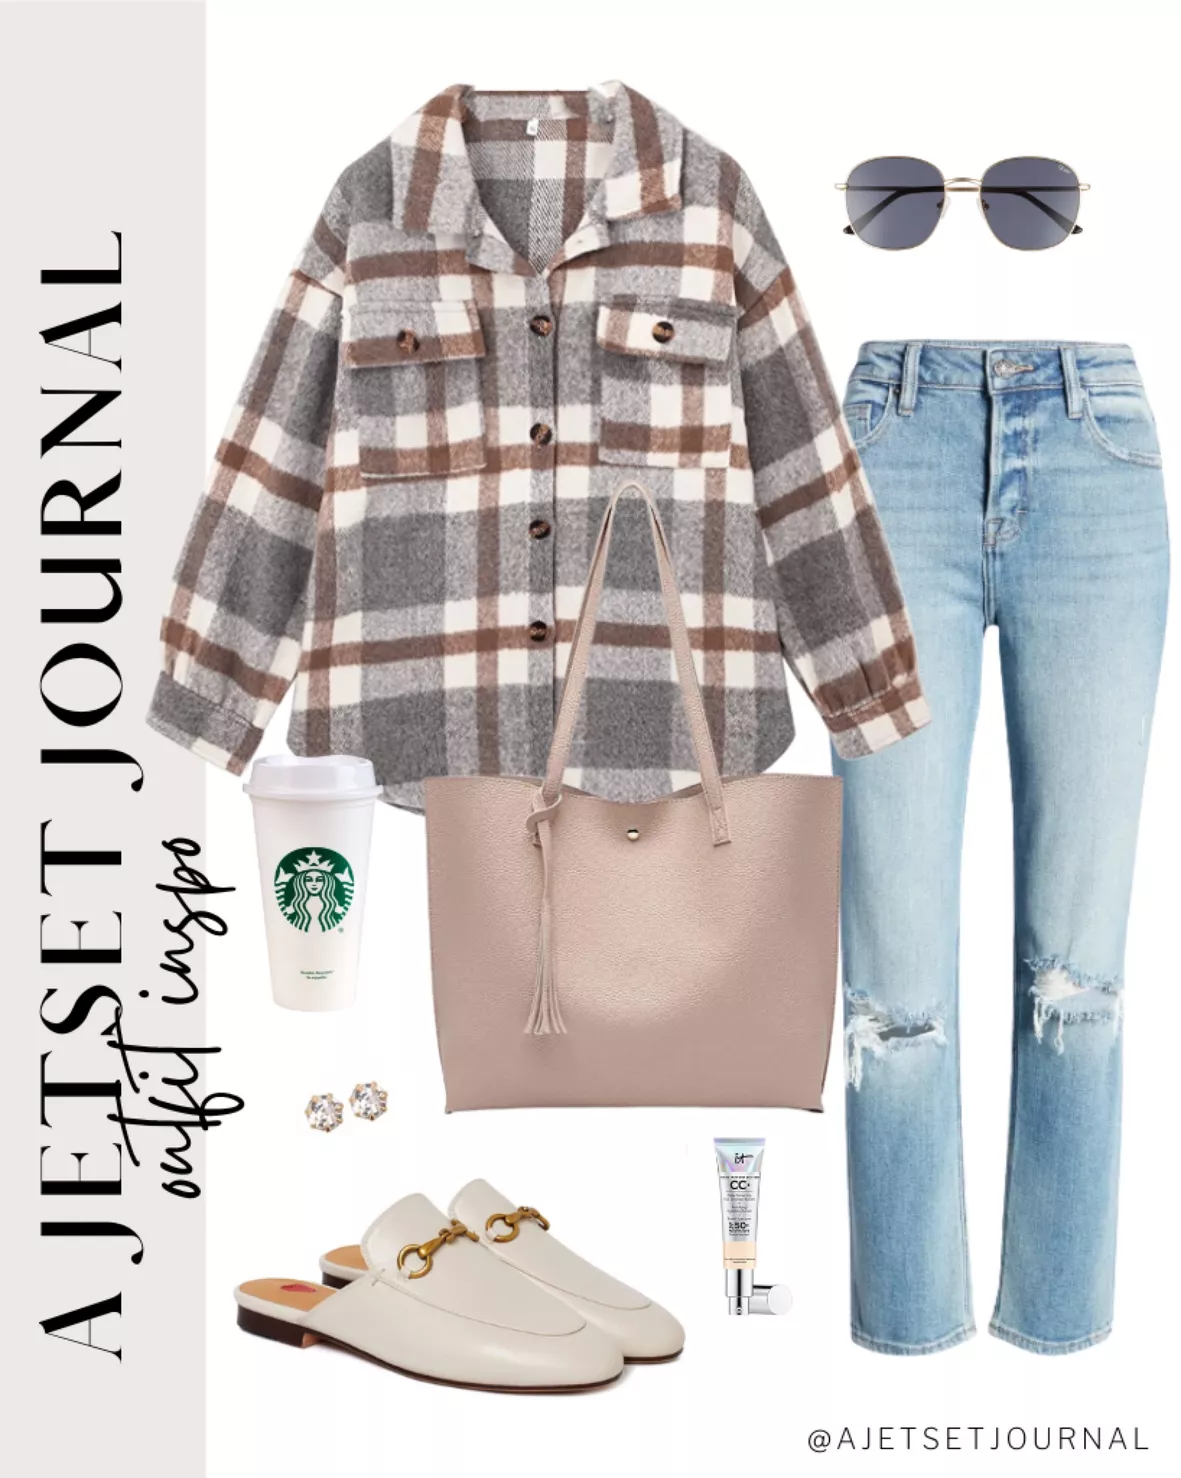 Outfits I Have Been Wearing for 2023 - A Jetset Journal